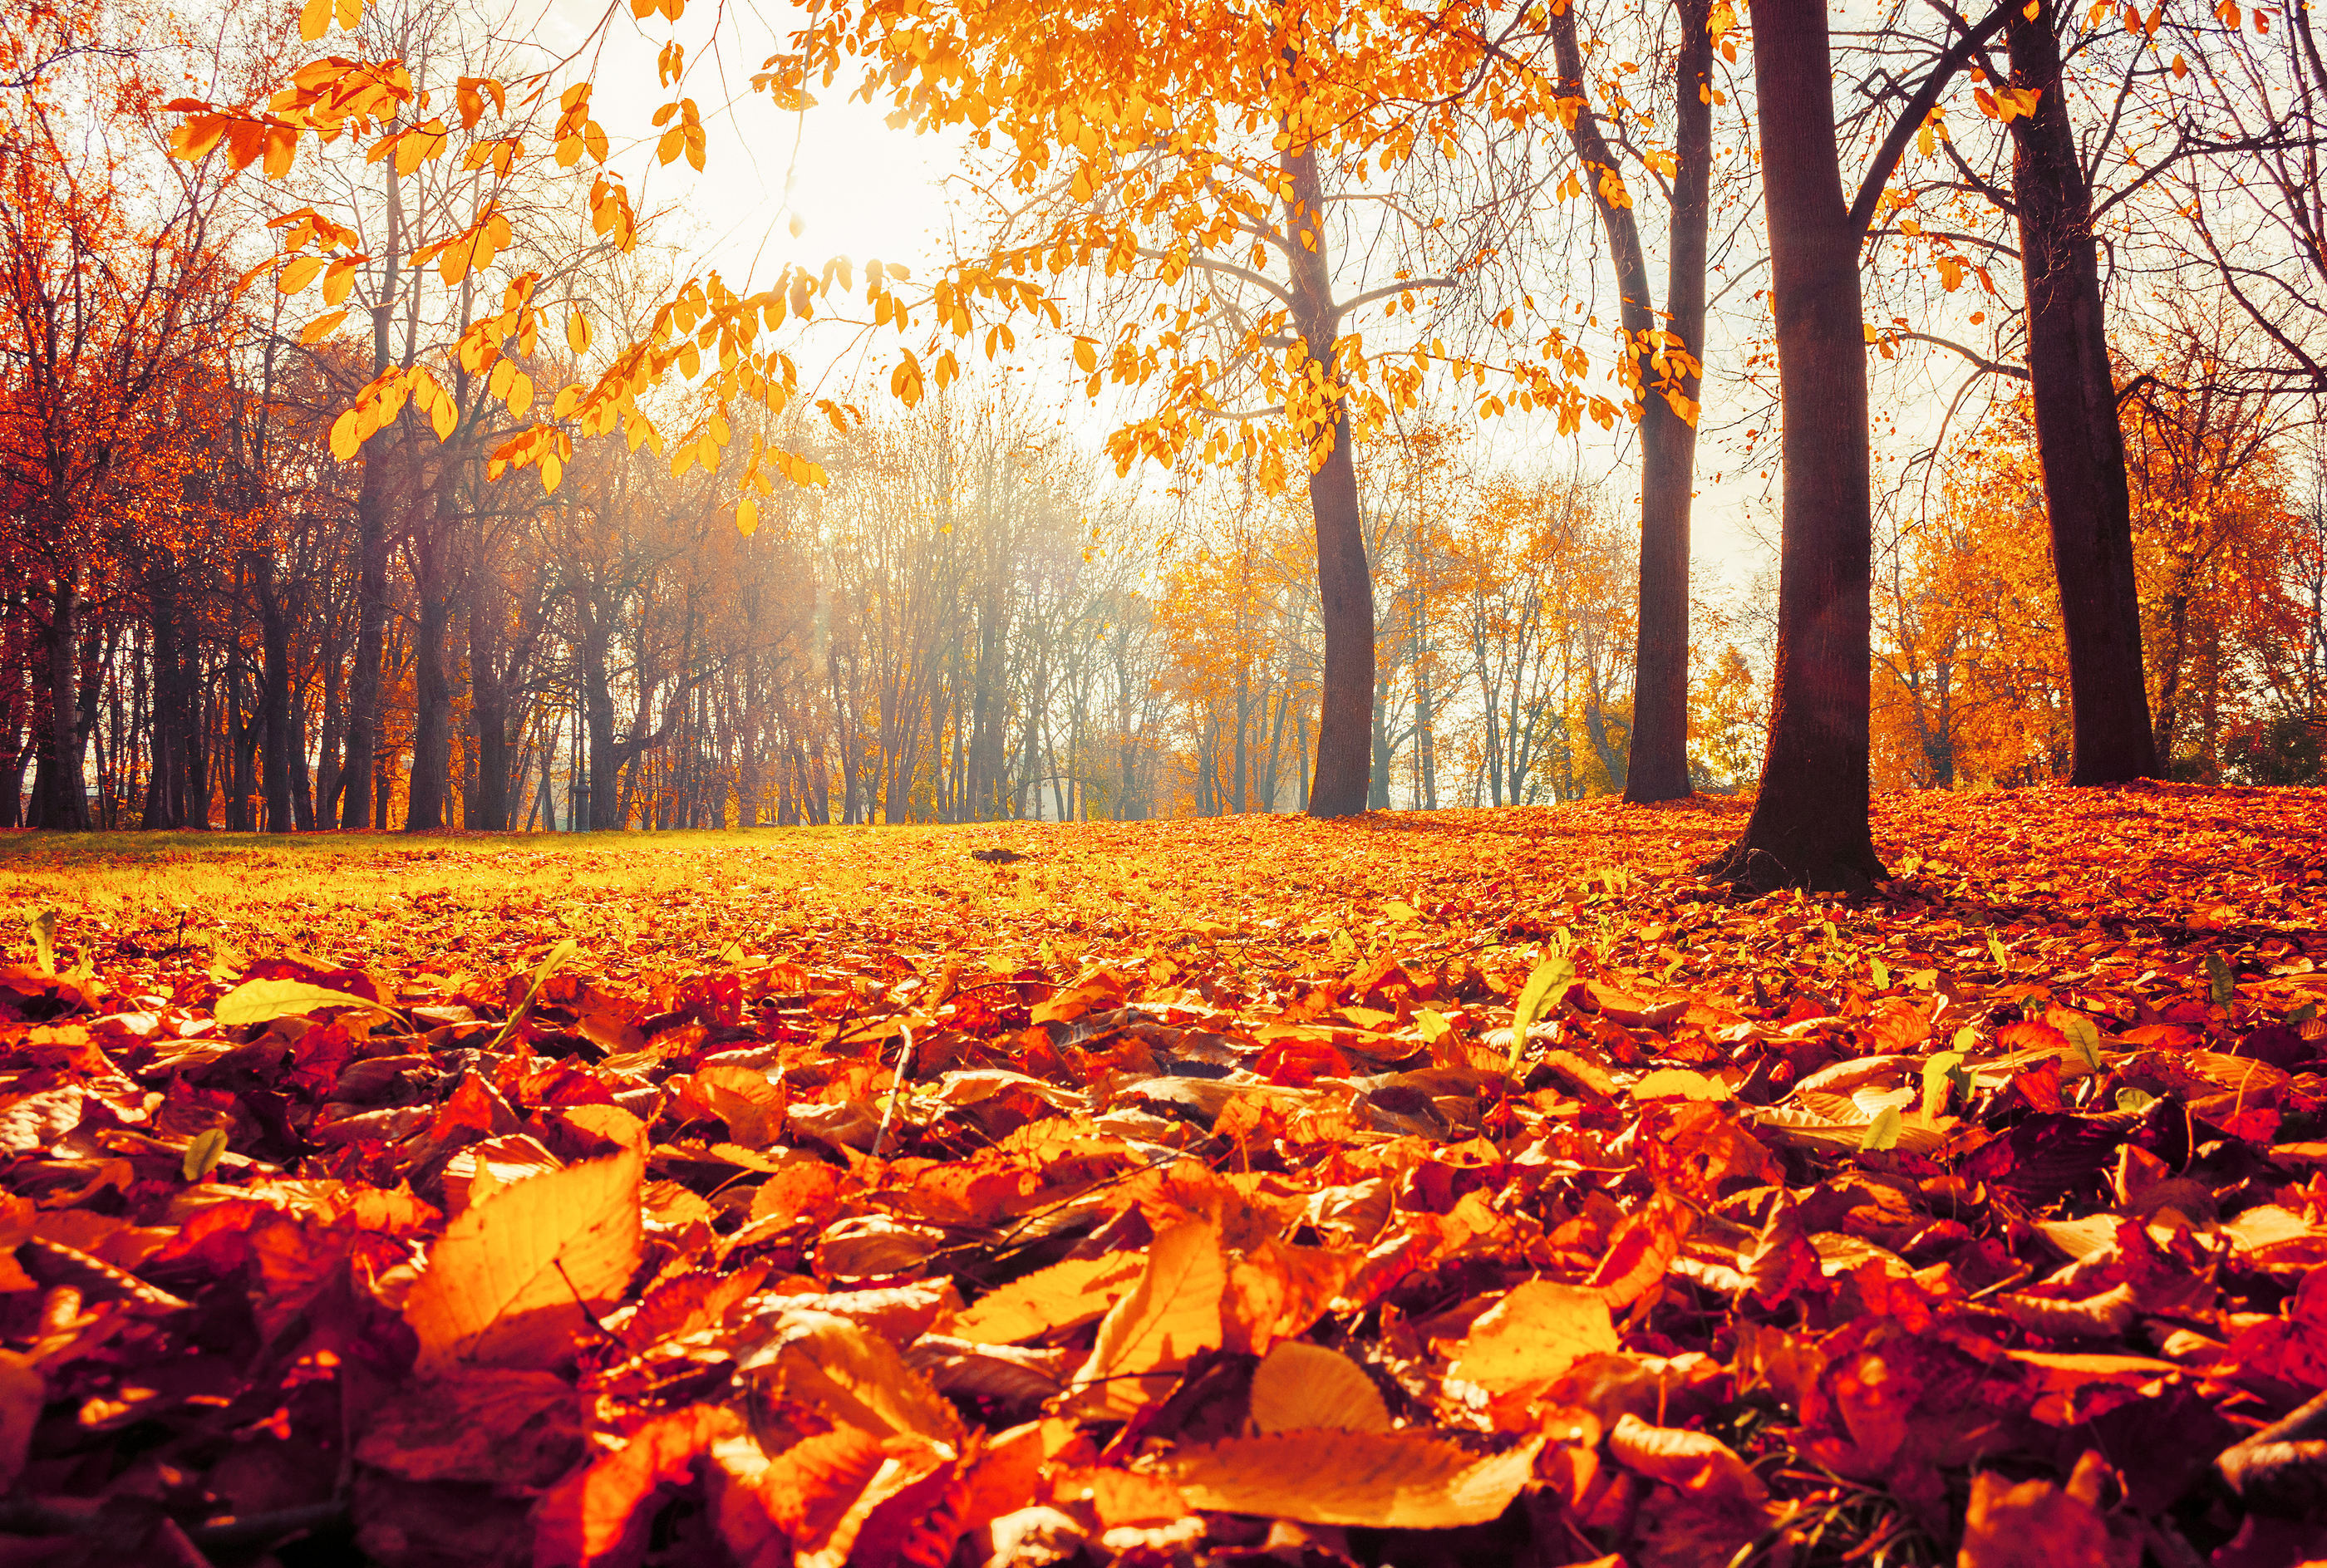 Did You Know These Facts About Fall?